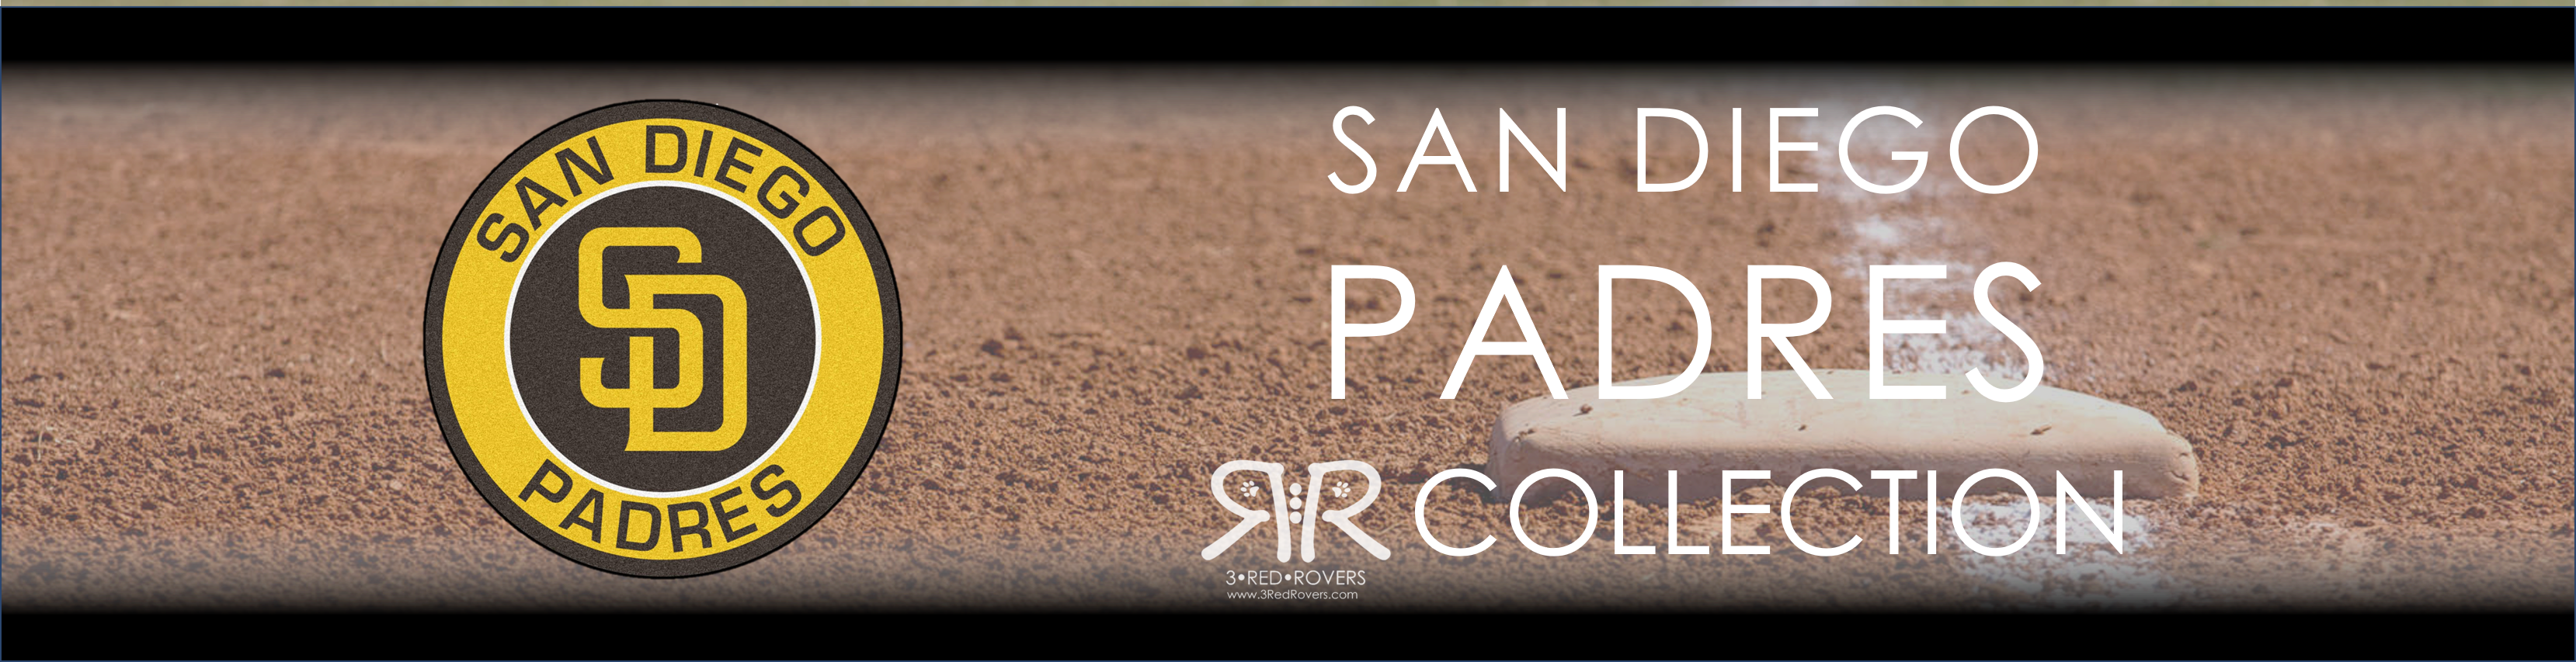 San Diego Padres – 3 Red Rovers